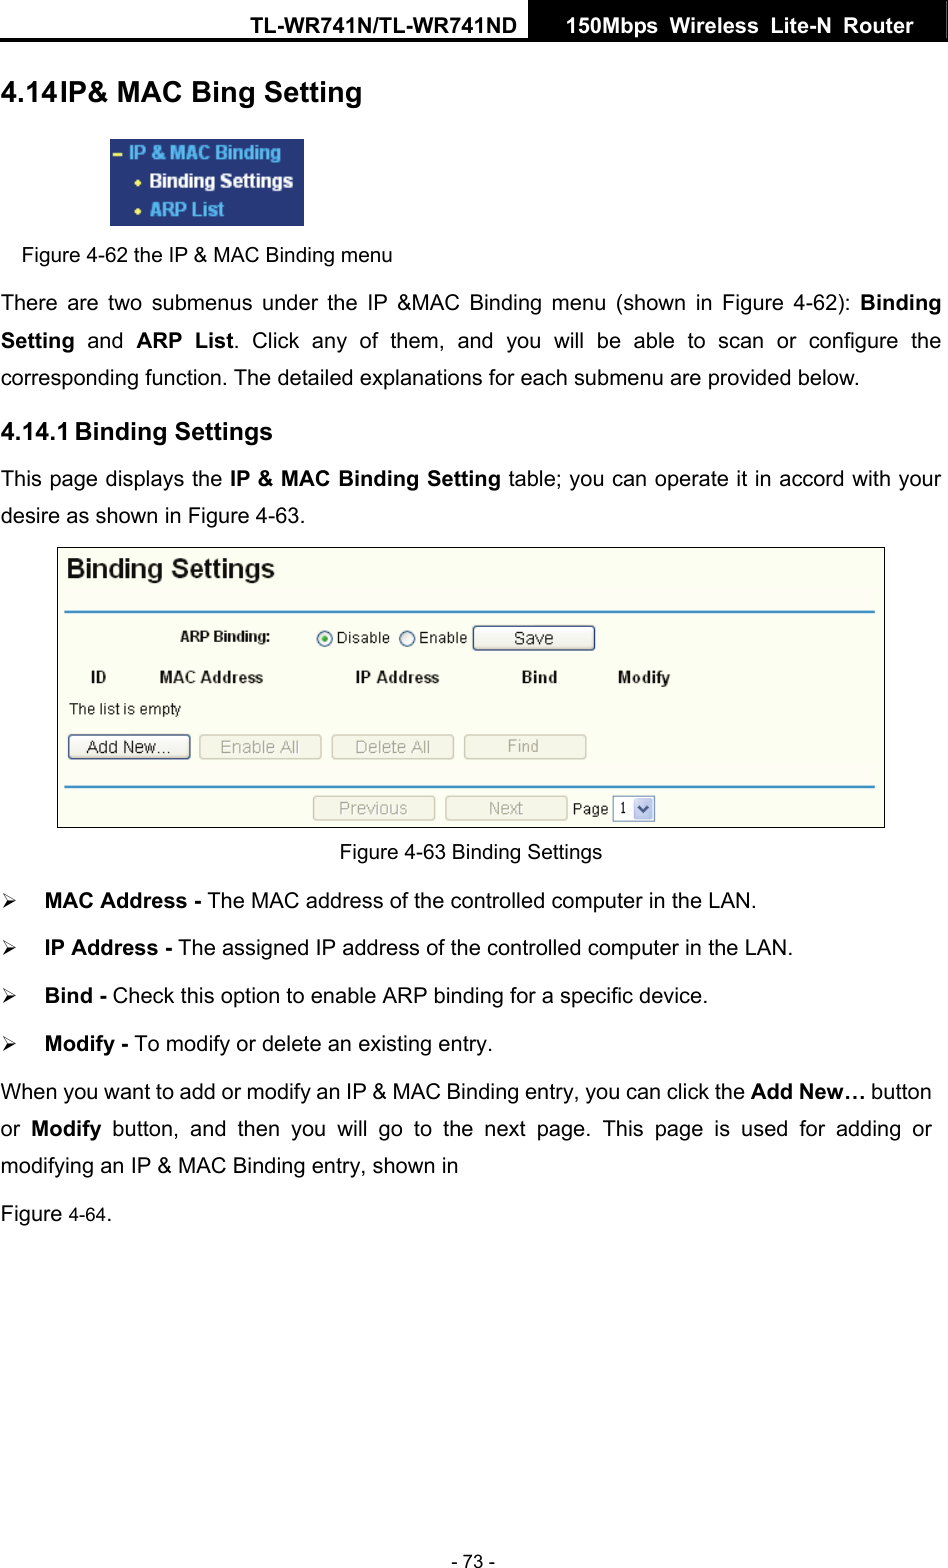 TL-WR741N/TL-WR741ND  150Mbps Wireless Lite-N Router   - 73 - 4.14 IP&amp; MAC Bing Setting  Figure 4-62 the IP &amp; MAC Binding menu There are two submenus under the IP &amp;MAC Binding menu (shown in Figure 4-62): Binding Setting  and ARP List. Click any of them, and you will be able to scan or configure the corresponding function. The detailed explanations for each submenu are provided below. 4.14.1 Binding Settings This page displays the IP &amp; MAC Binding Setting table; you can operate it in accord with your desire as shown in Figure 4-63.    Figure 4-63 Binding Settings ¾ MAC Address - The MAC address of the controlled computer in the LAN.   ¾ IP Address - The assigned IP address of the controlled computer in the LAN.   ¾ Bind - Check this option to enable ARP binding for a specific device.   ¾ Modify - To modify or delete an existing entry.   When you want to add or modify an IP &amp; MAC Binding entry, you can click the Add New… button or  Modify button, and then you will go to the next page. This page is used for adding or modifying an IP &amp; MAC Binding entry, shown in   Figure 4-64.  